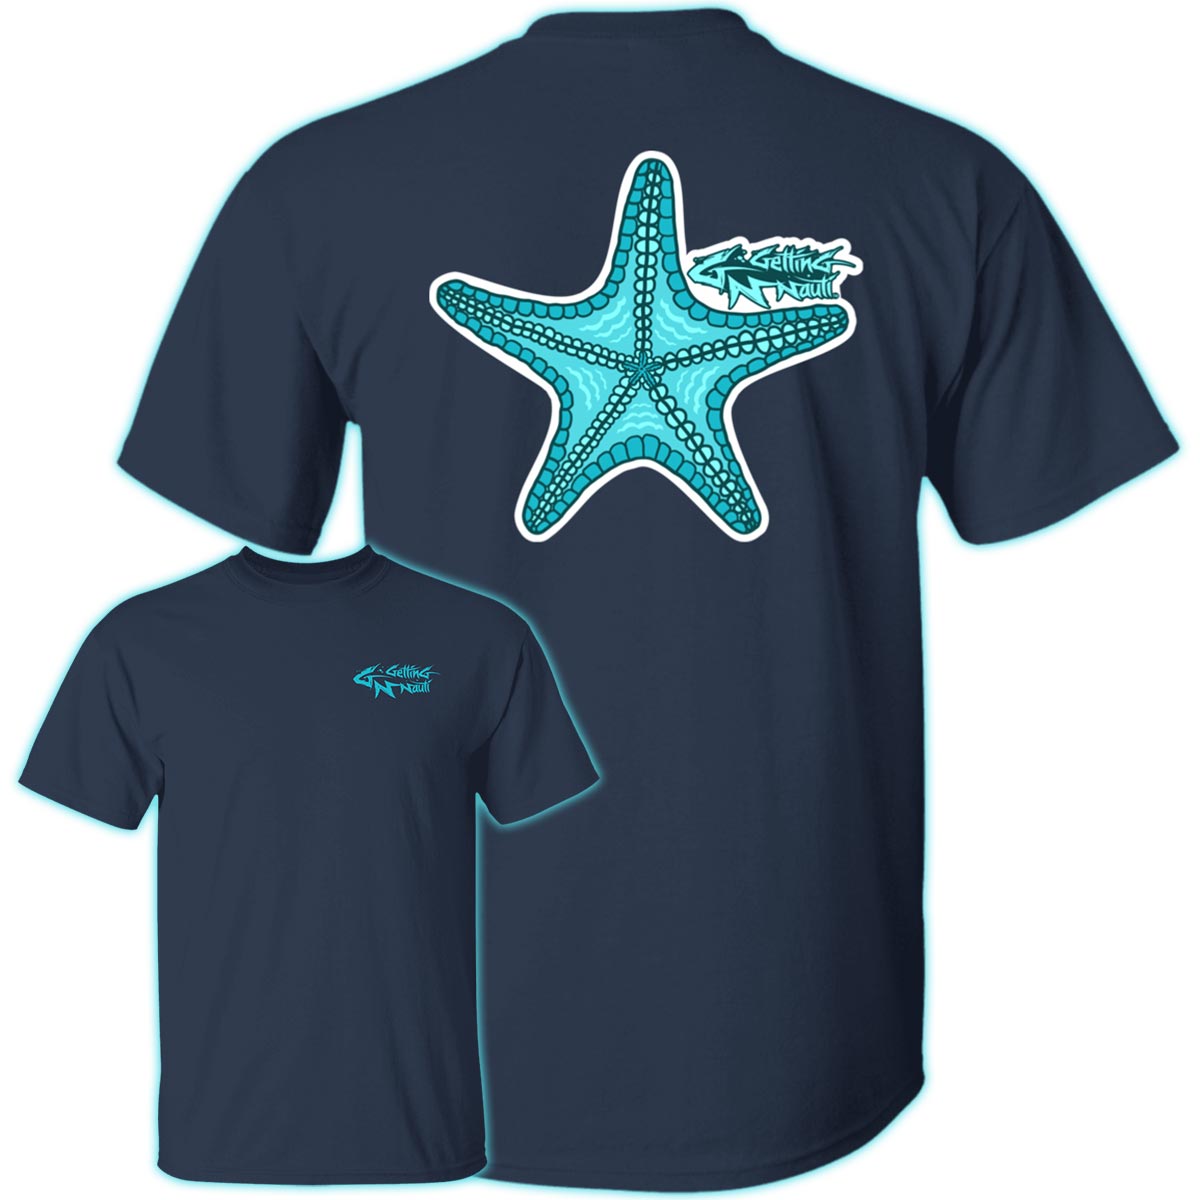 Starfish Graphic, Women's T-shirt, Medium Size fitted Fit CLEARANCE SALE  Free Shipping on Purchases Over 20 US Dollar. 